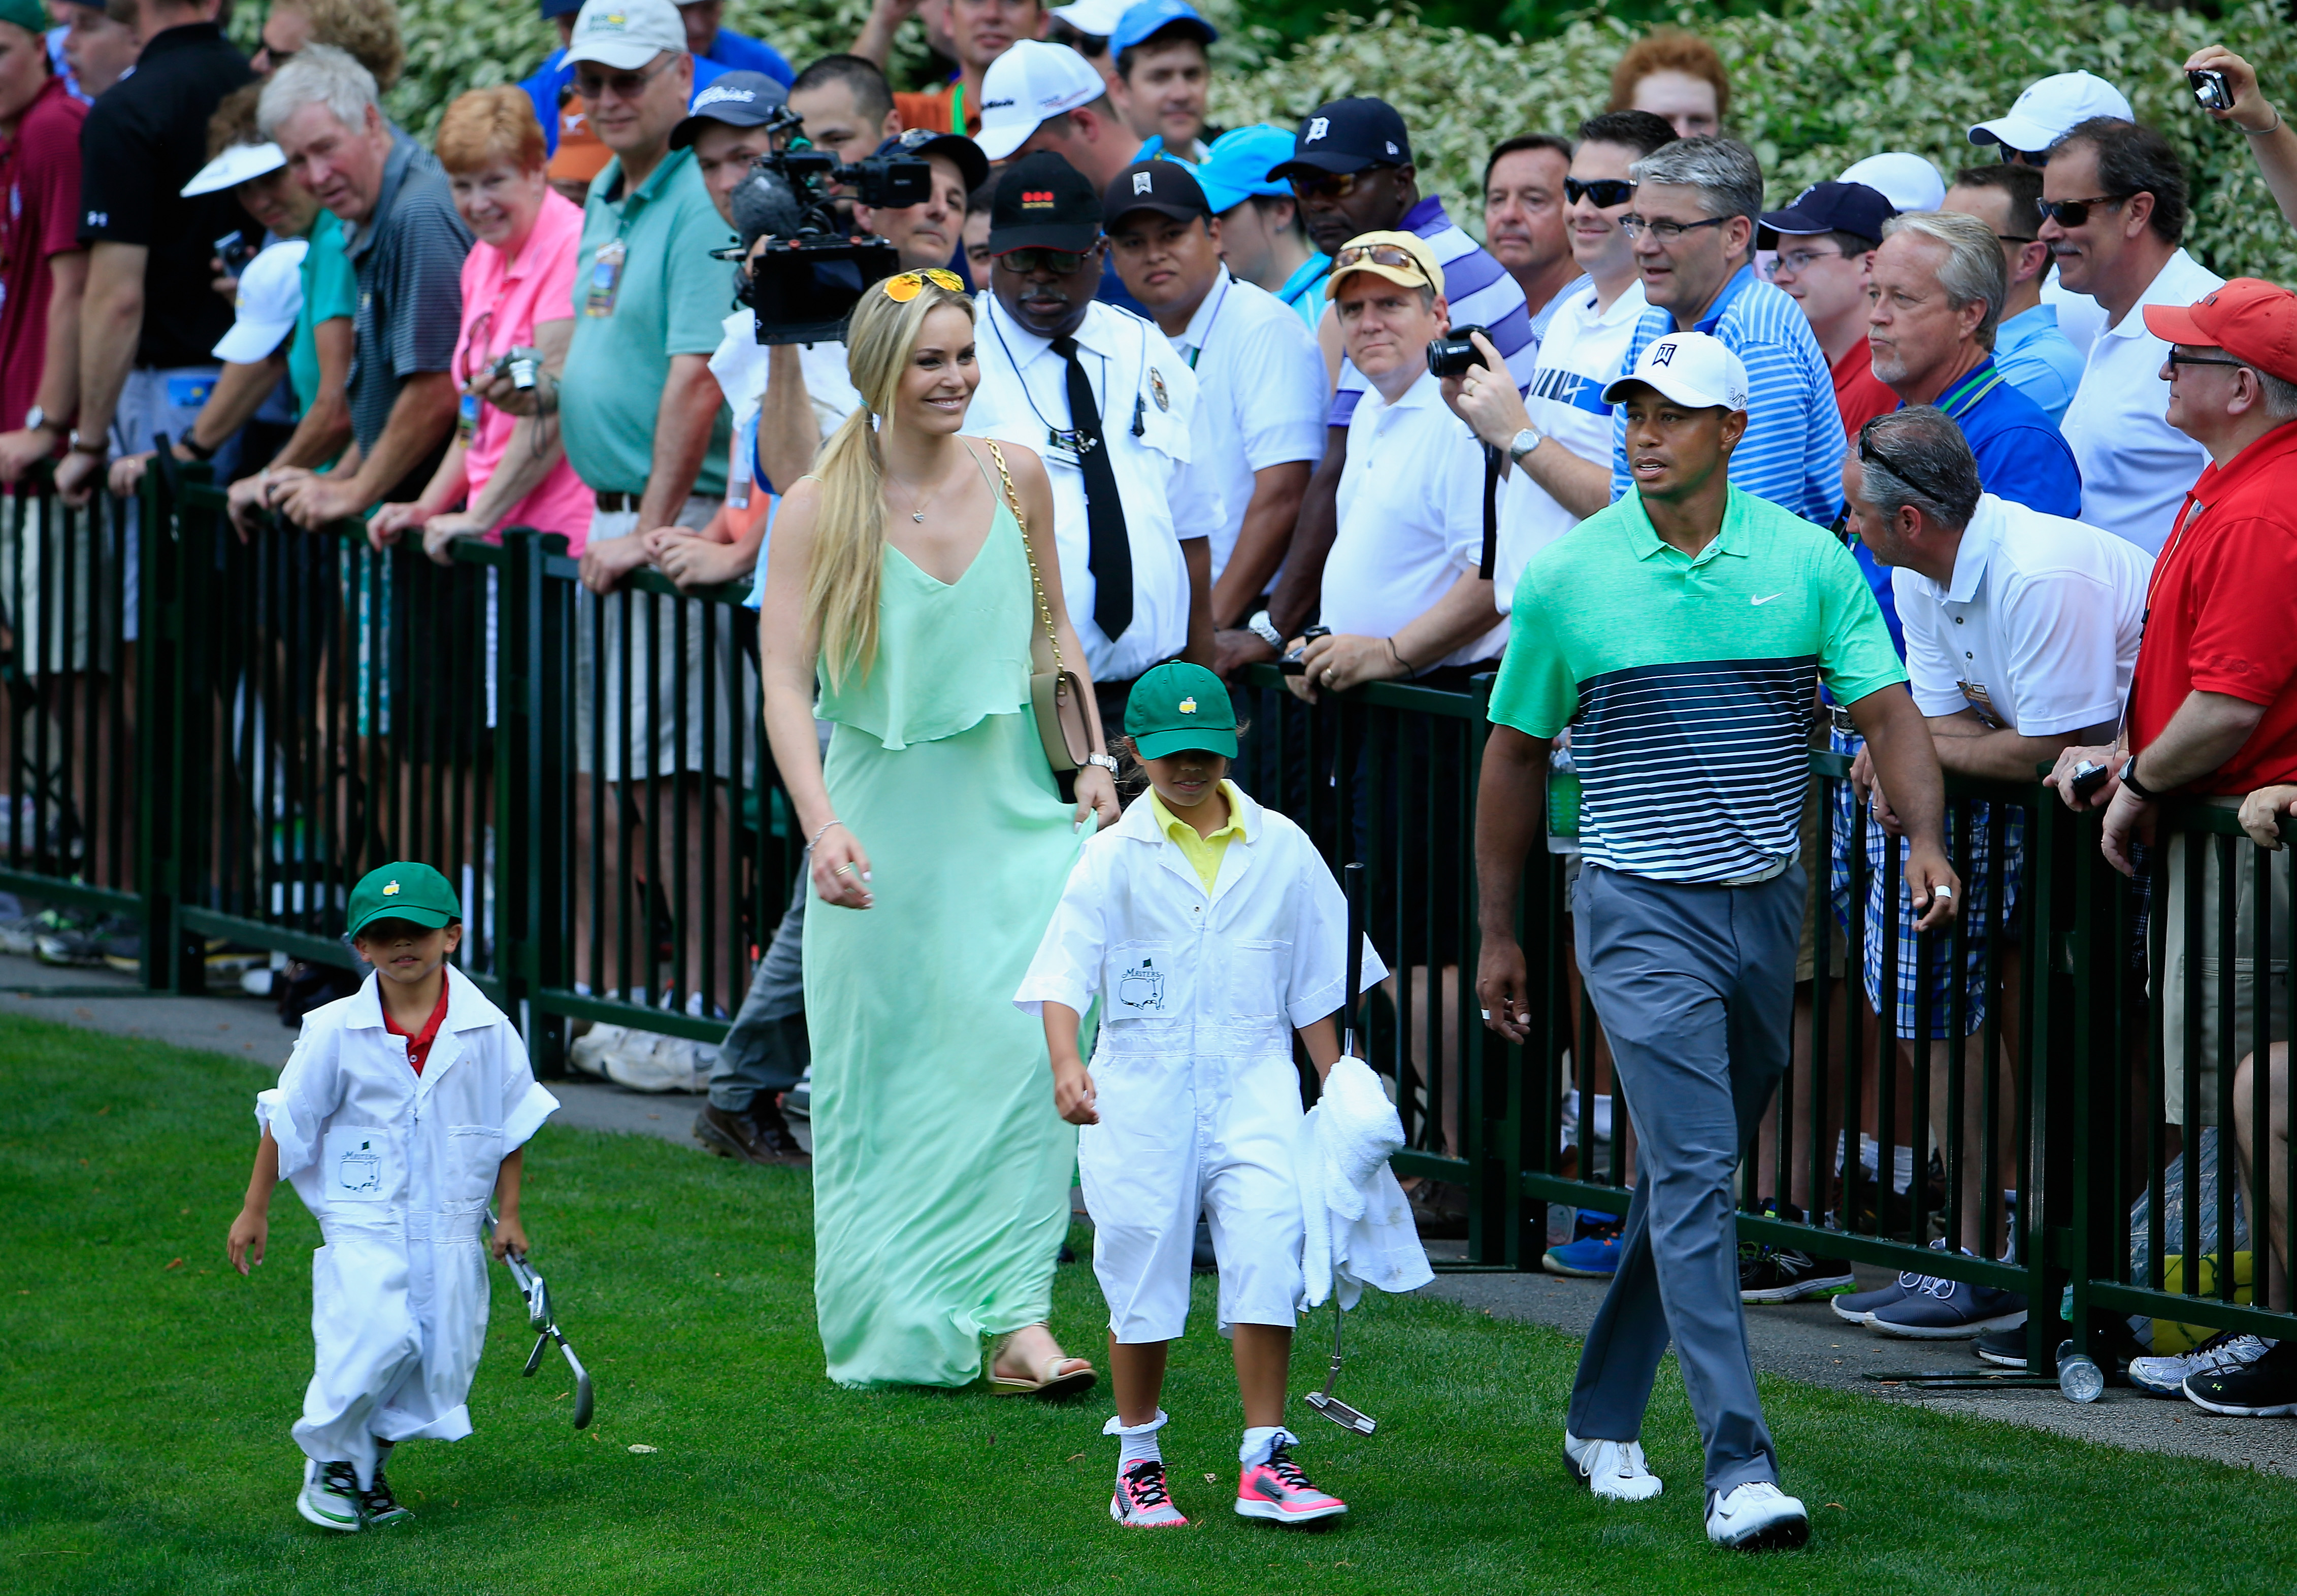 Tiger Woods with Lindsey Vonn, his son, Charlie, and daughter Sam during the Par 3 Contest at Augusta National Golf Club on April 8, 2015, in Georgia. | Source: Getty Images